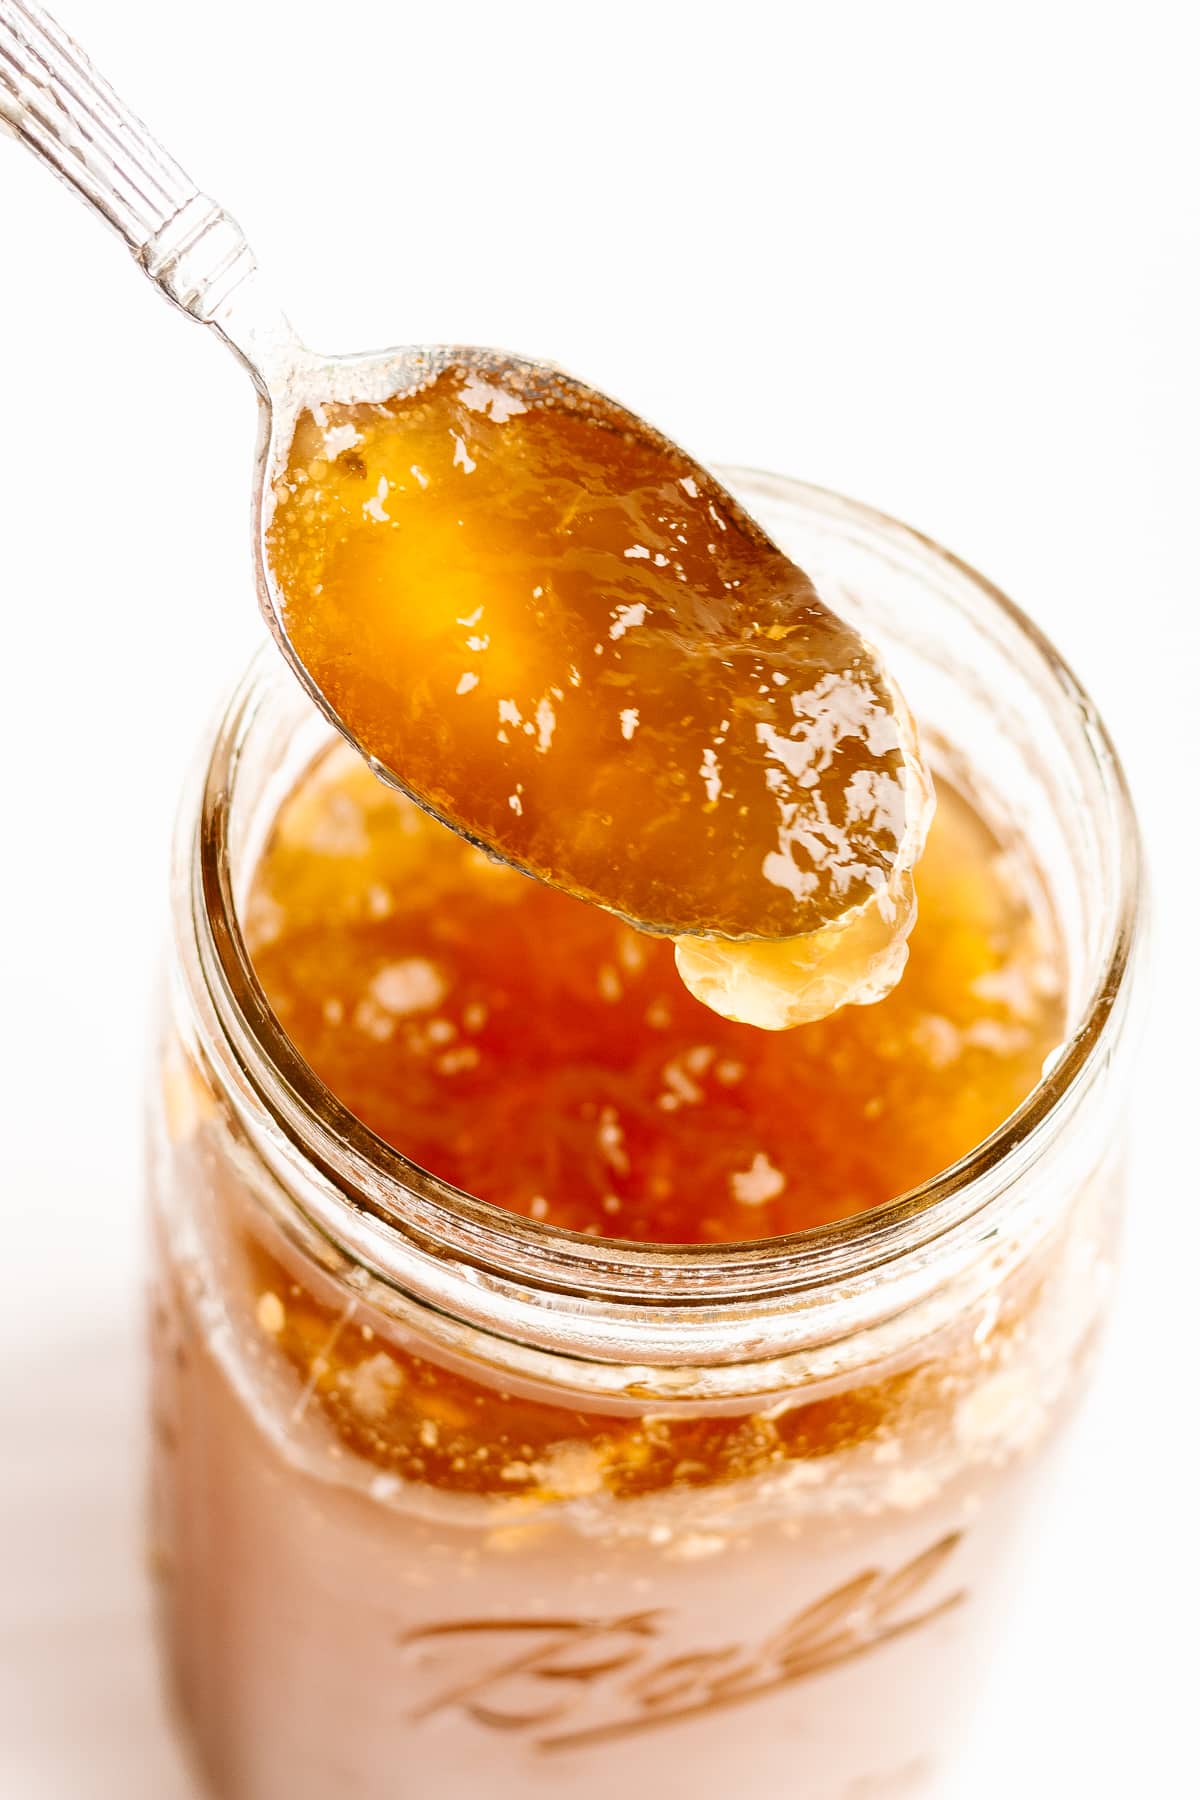 Spoonful of chilled bone broth being lifted out of a glass mason jar.